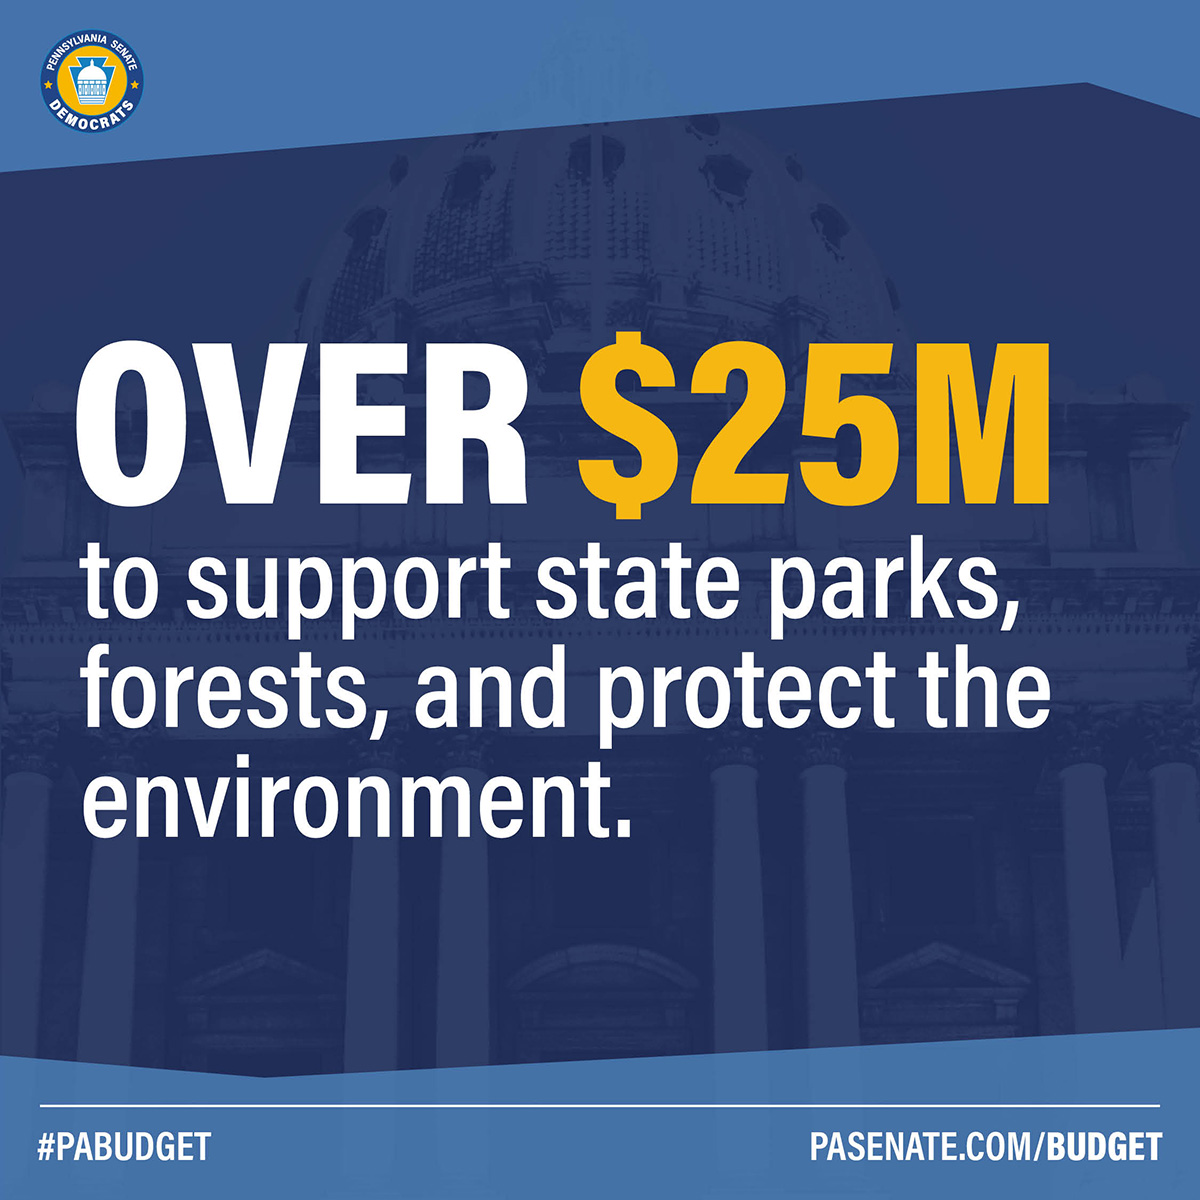 Over $25M to support state parks, forests, and protect the environment